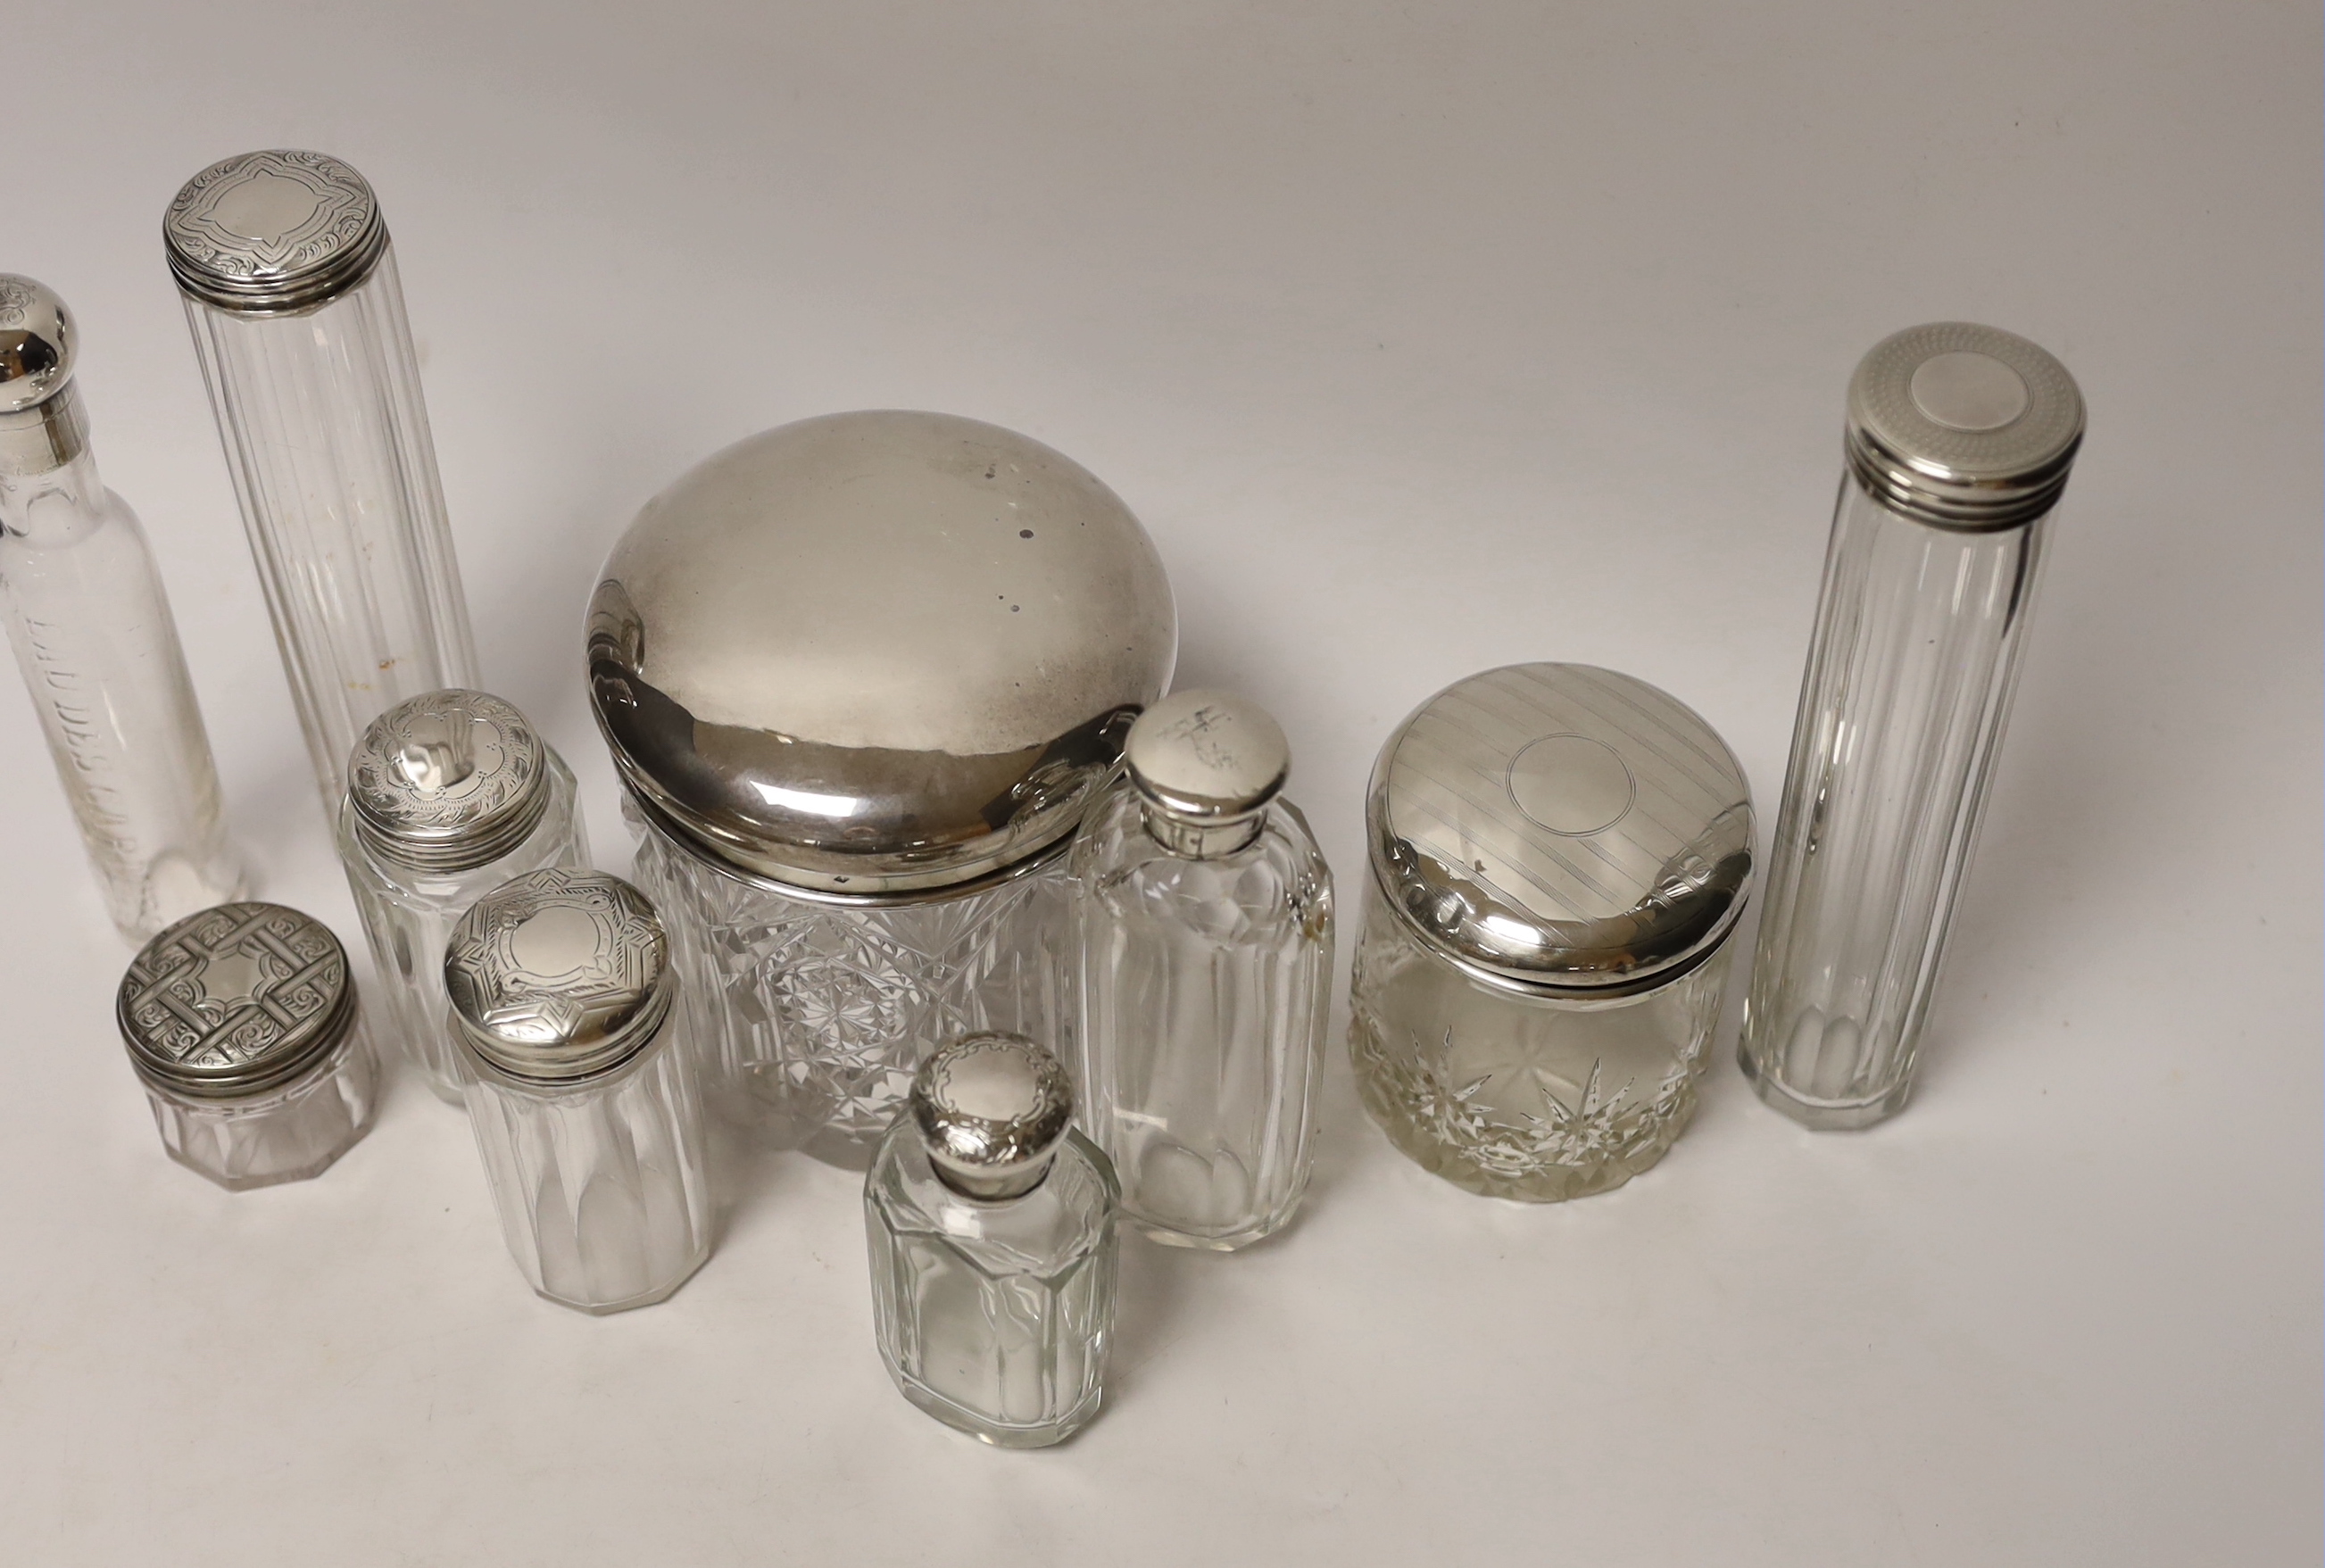 A group of assorted silver or white metal topped toilet jars, tallest 17.6cm.